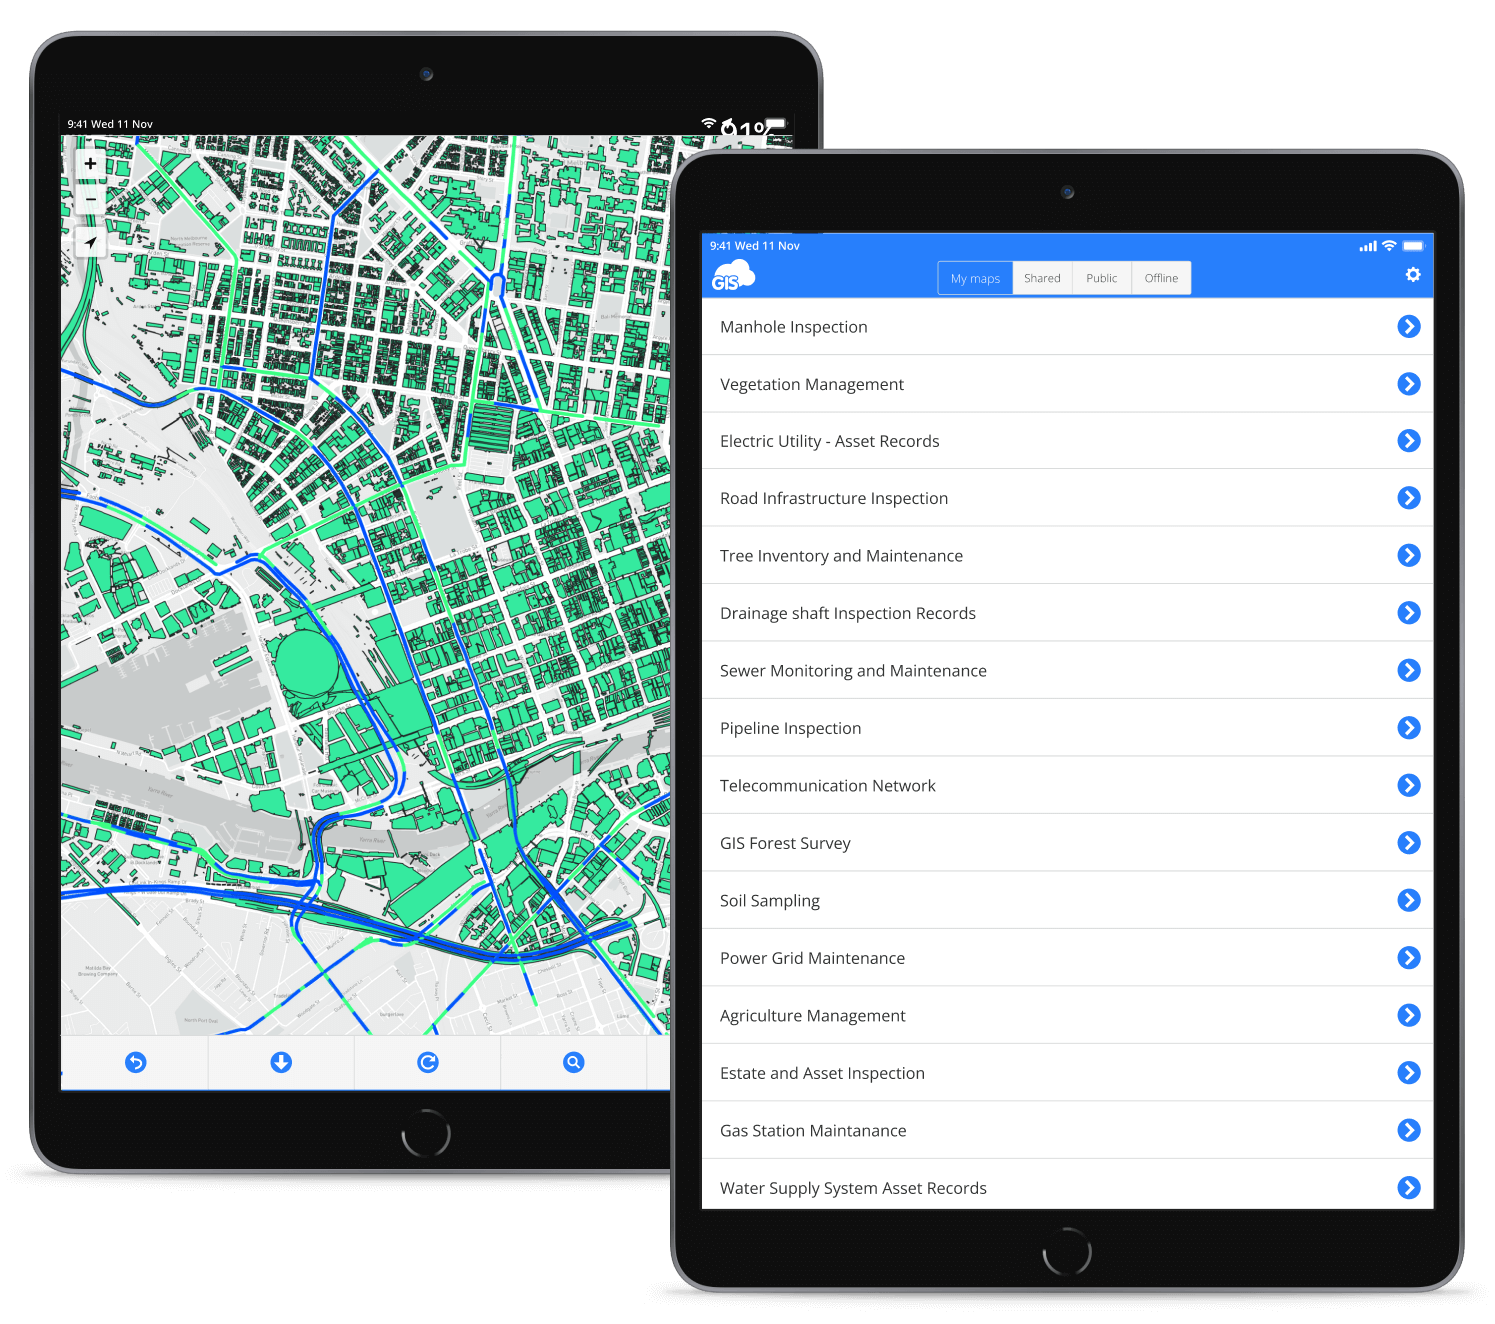 Access maps and projects on any device, privately or publicaly.